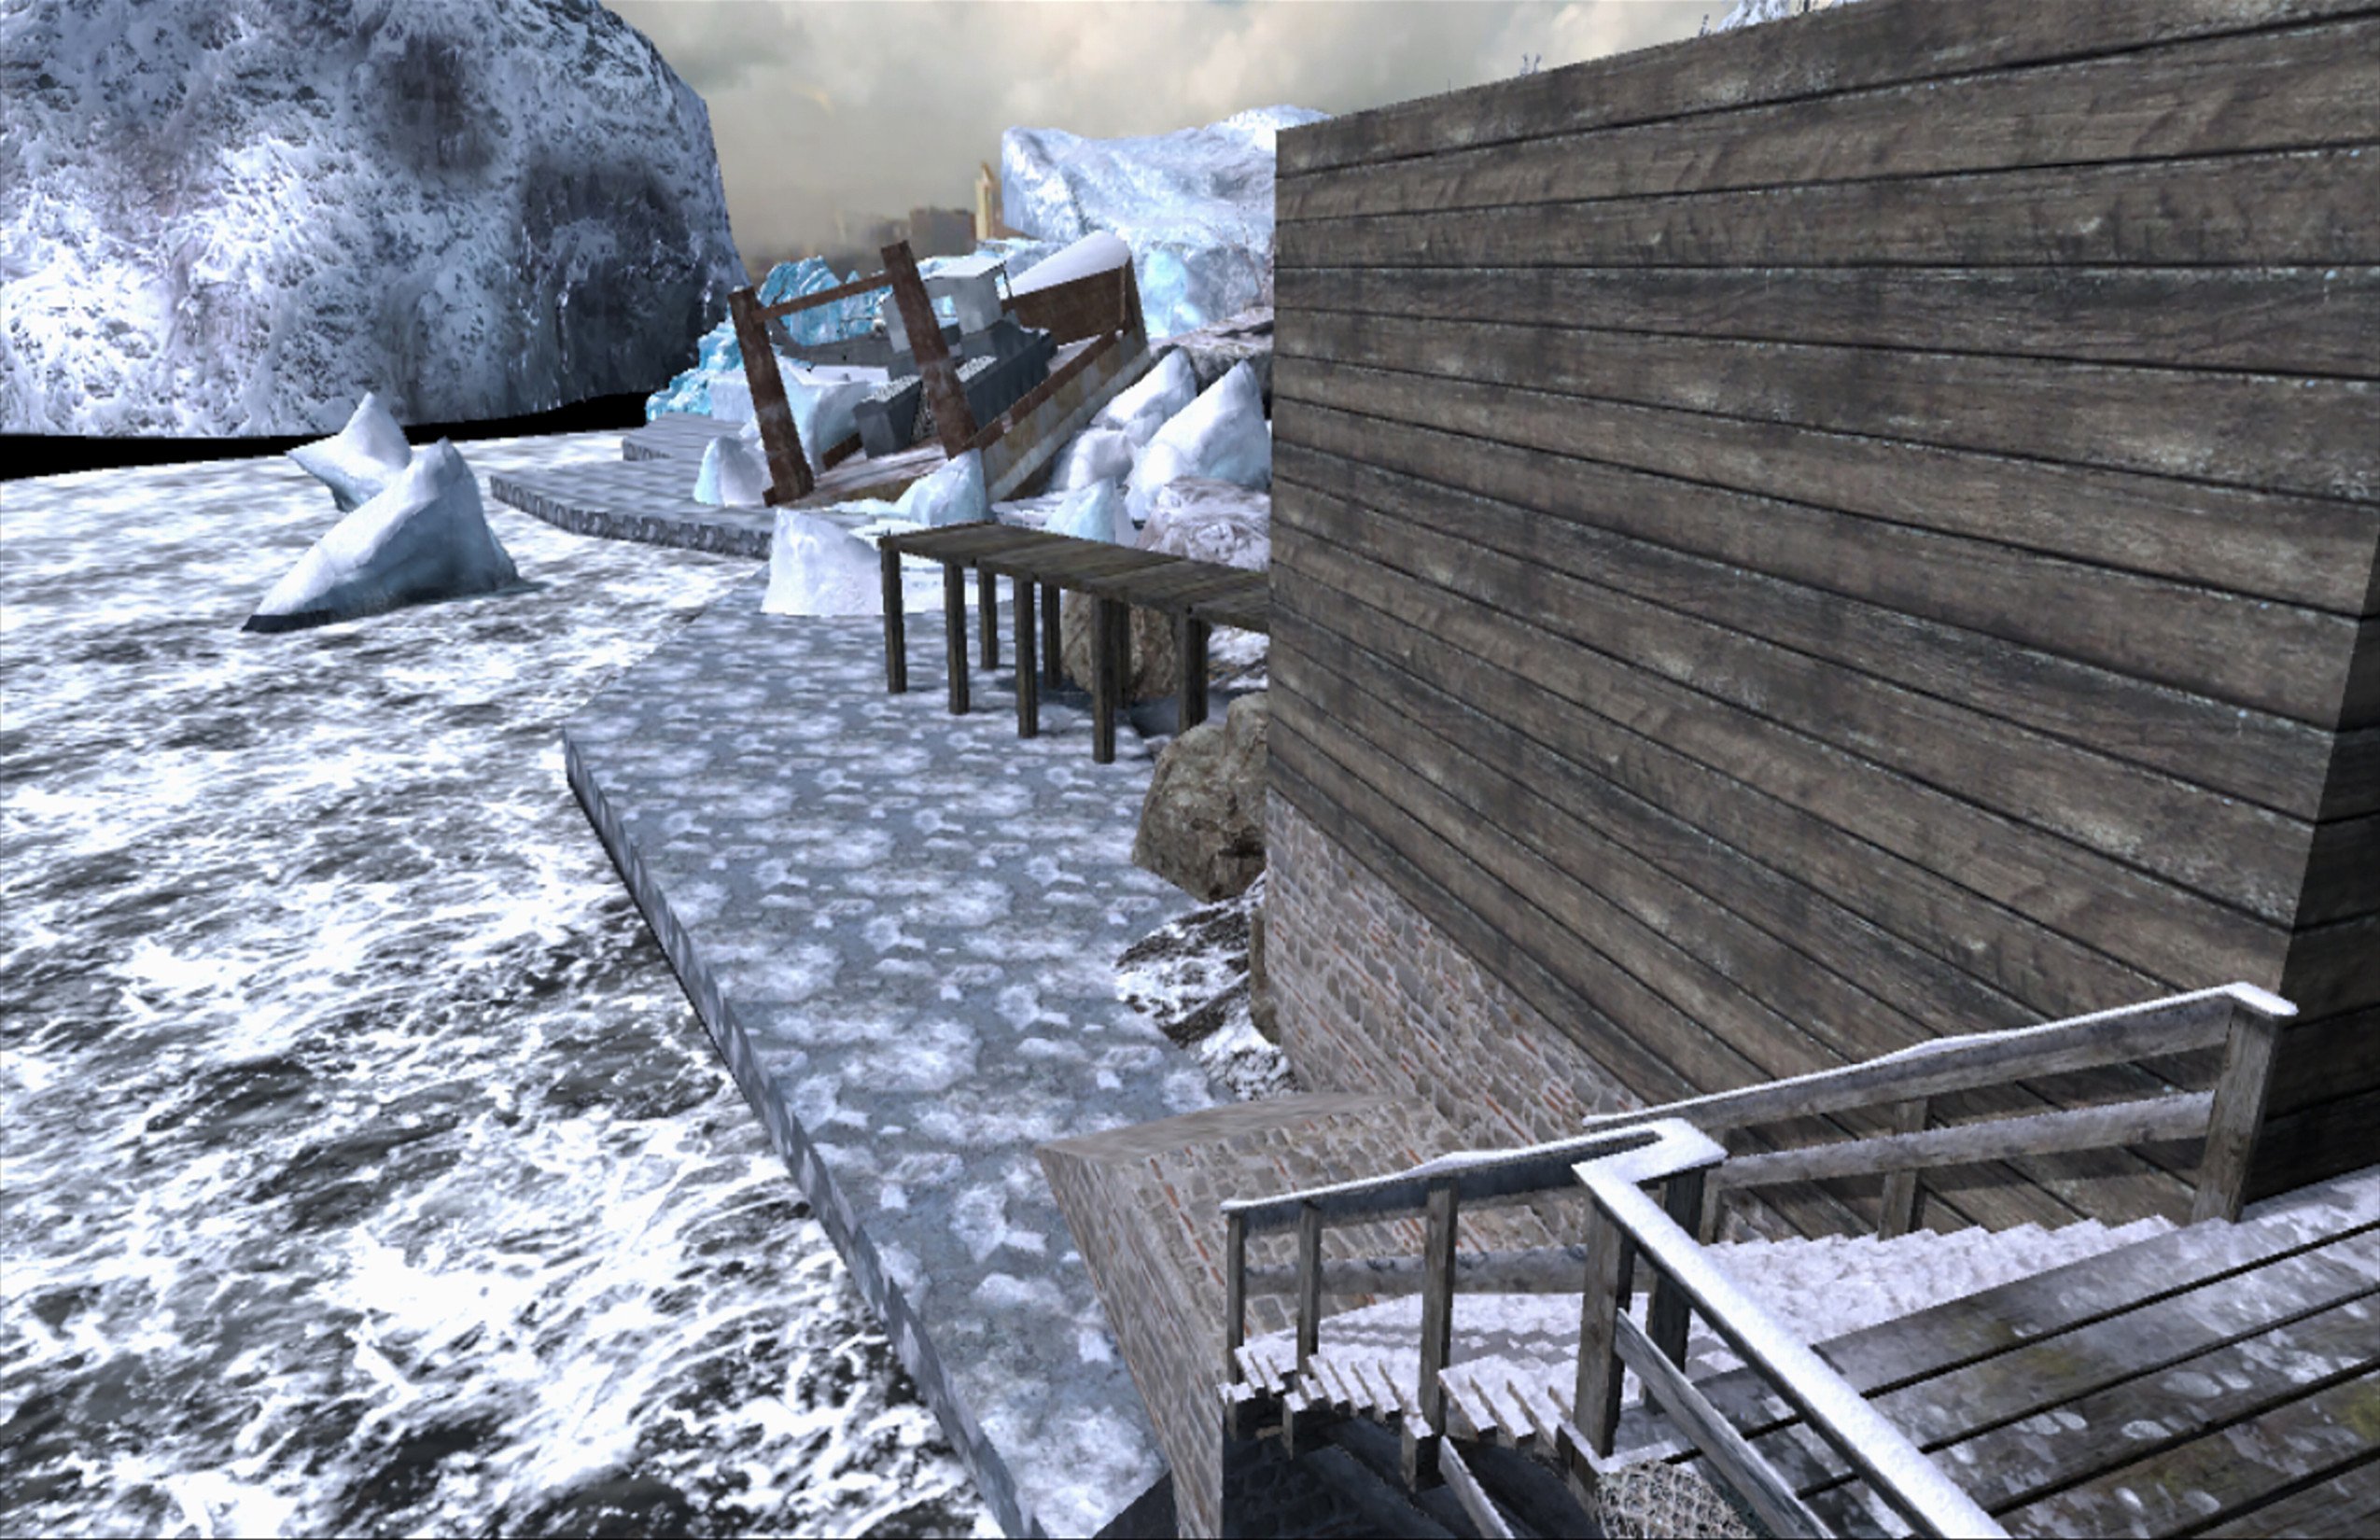 Original blockout screenshot provided for paintover